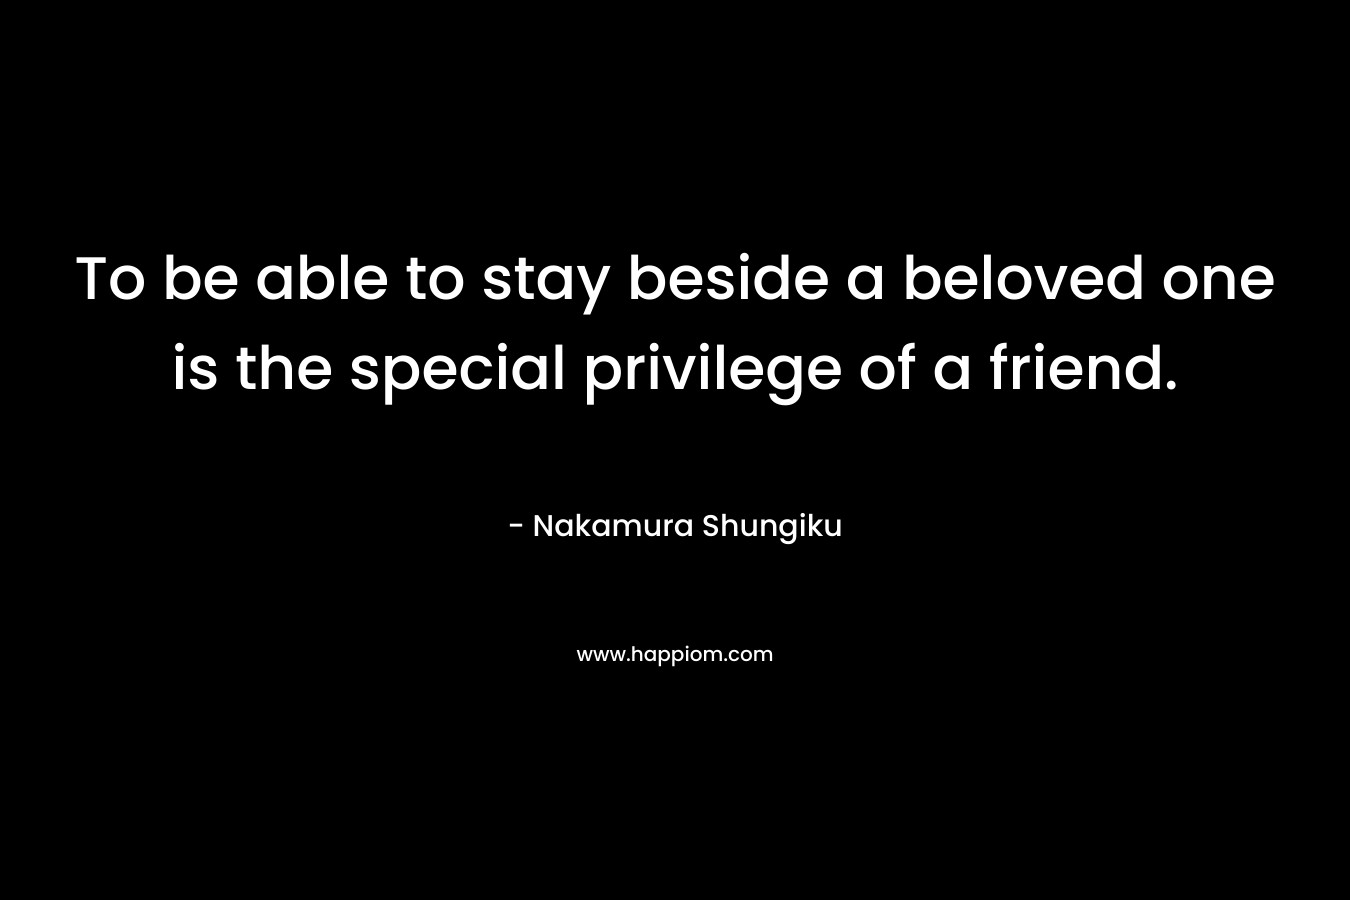 To be able to stay beside a beloved one is the special privilege of a friend.